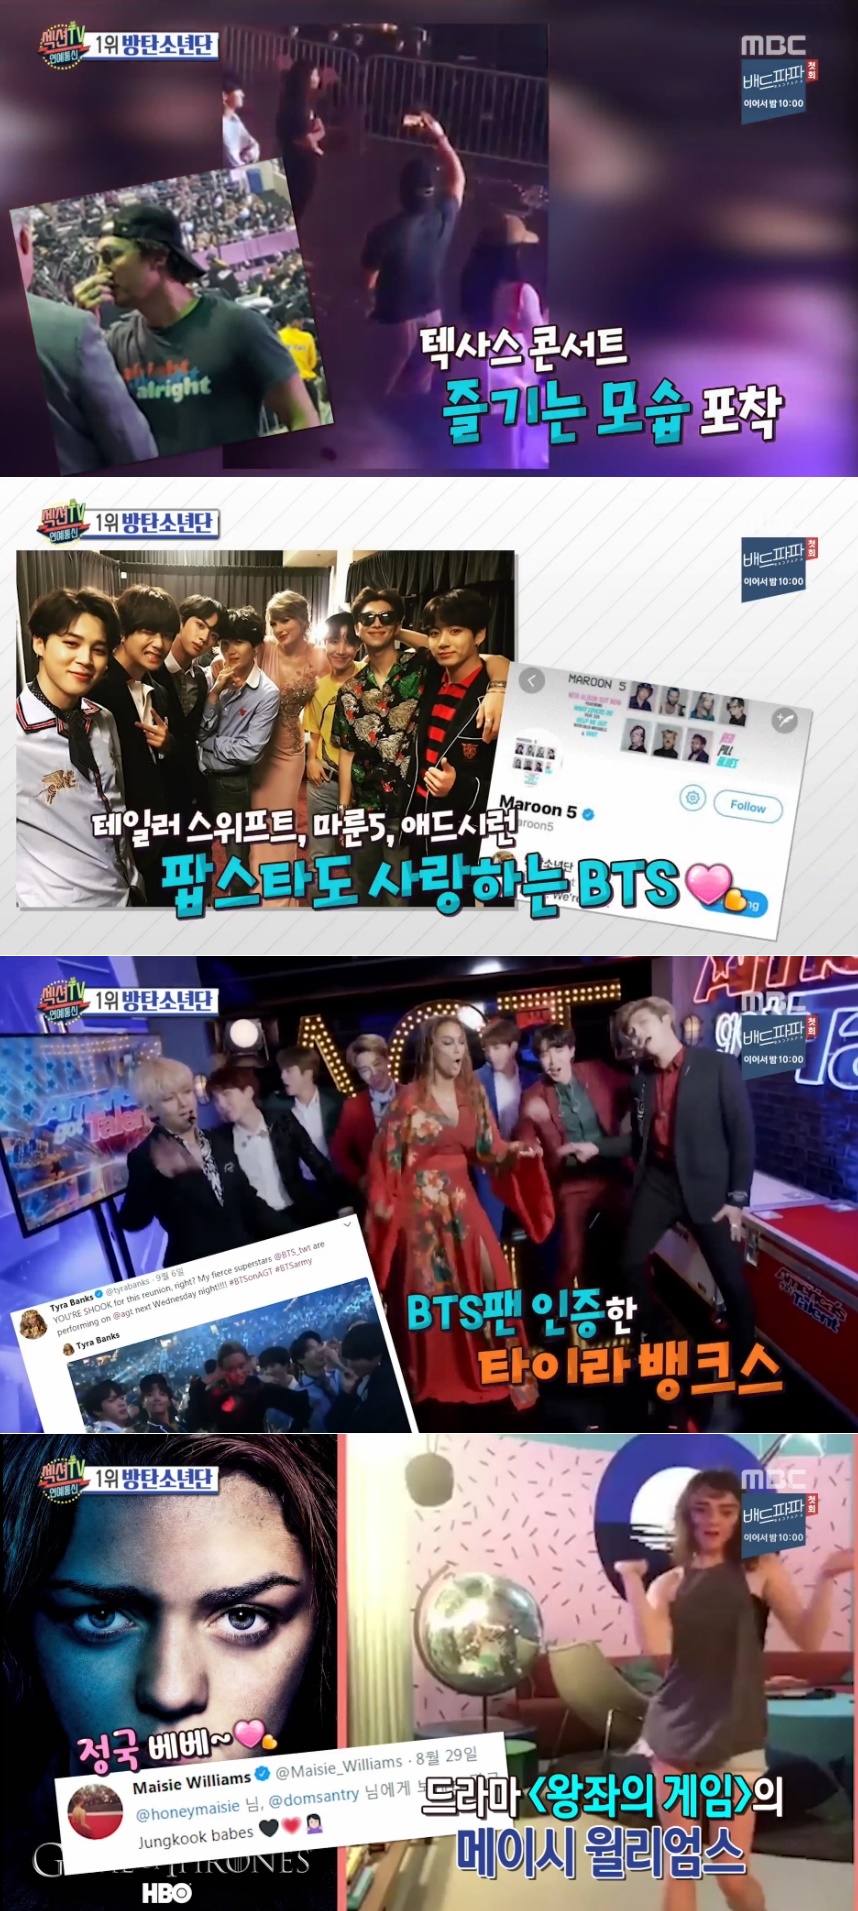 Boy group BTS, which has emerged as a global star, also caught Hollywood top stars.News about BTS, which is on the rise, was discussed on MBCs Section TV Entertainment Communication broadcast on October 1, with news such as a recent UN General Assembly speech, and appearance of the United States of America NBCs talk show The Tonight Show Starring Jimmy Fallon.BTS, which has become popular with authentic music that brings out the sympathy of younger generations, is also hotly loved by Hollywood famous stars recently.According to the section TV Entertainment Communication, Hollywood actor Matthew McConaughey, who is familiar in Korea as the movie Interstellar at the BTS global tour LOVE YOURSELF in United States of America Texas on the 16th (local time), was caught watching the performance.Actor Elle Fanning and director Max Mingela are also said to be feeling favorable to BTS thanks to Dylan OBrien of Maze Runner.Macy Williams, who appeared in the famous drama Game of Thrones, recently posted a video of himself dancing Idol on SNS.hwang hye-jin